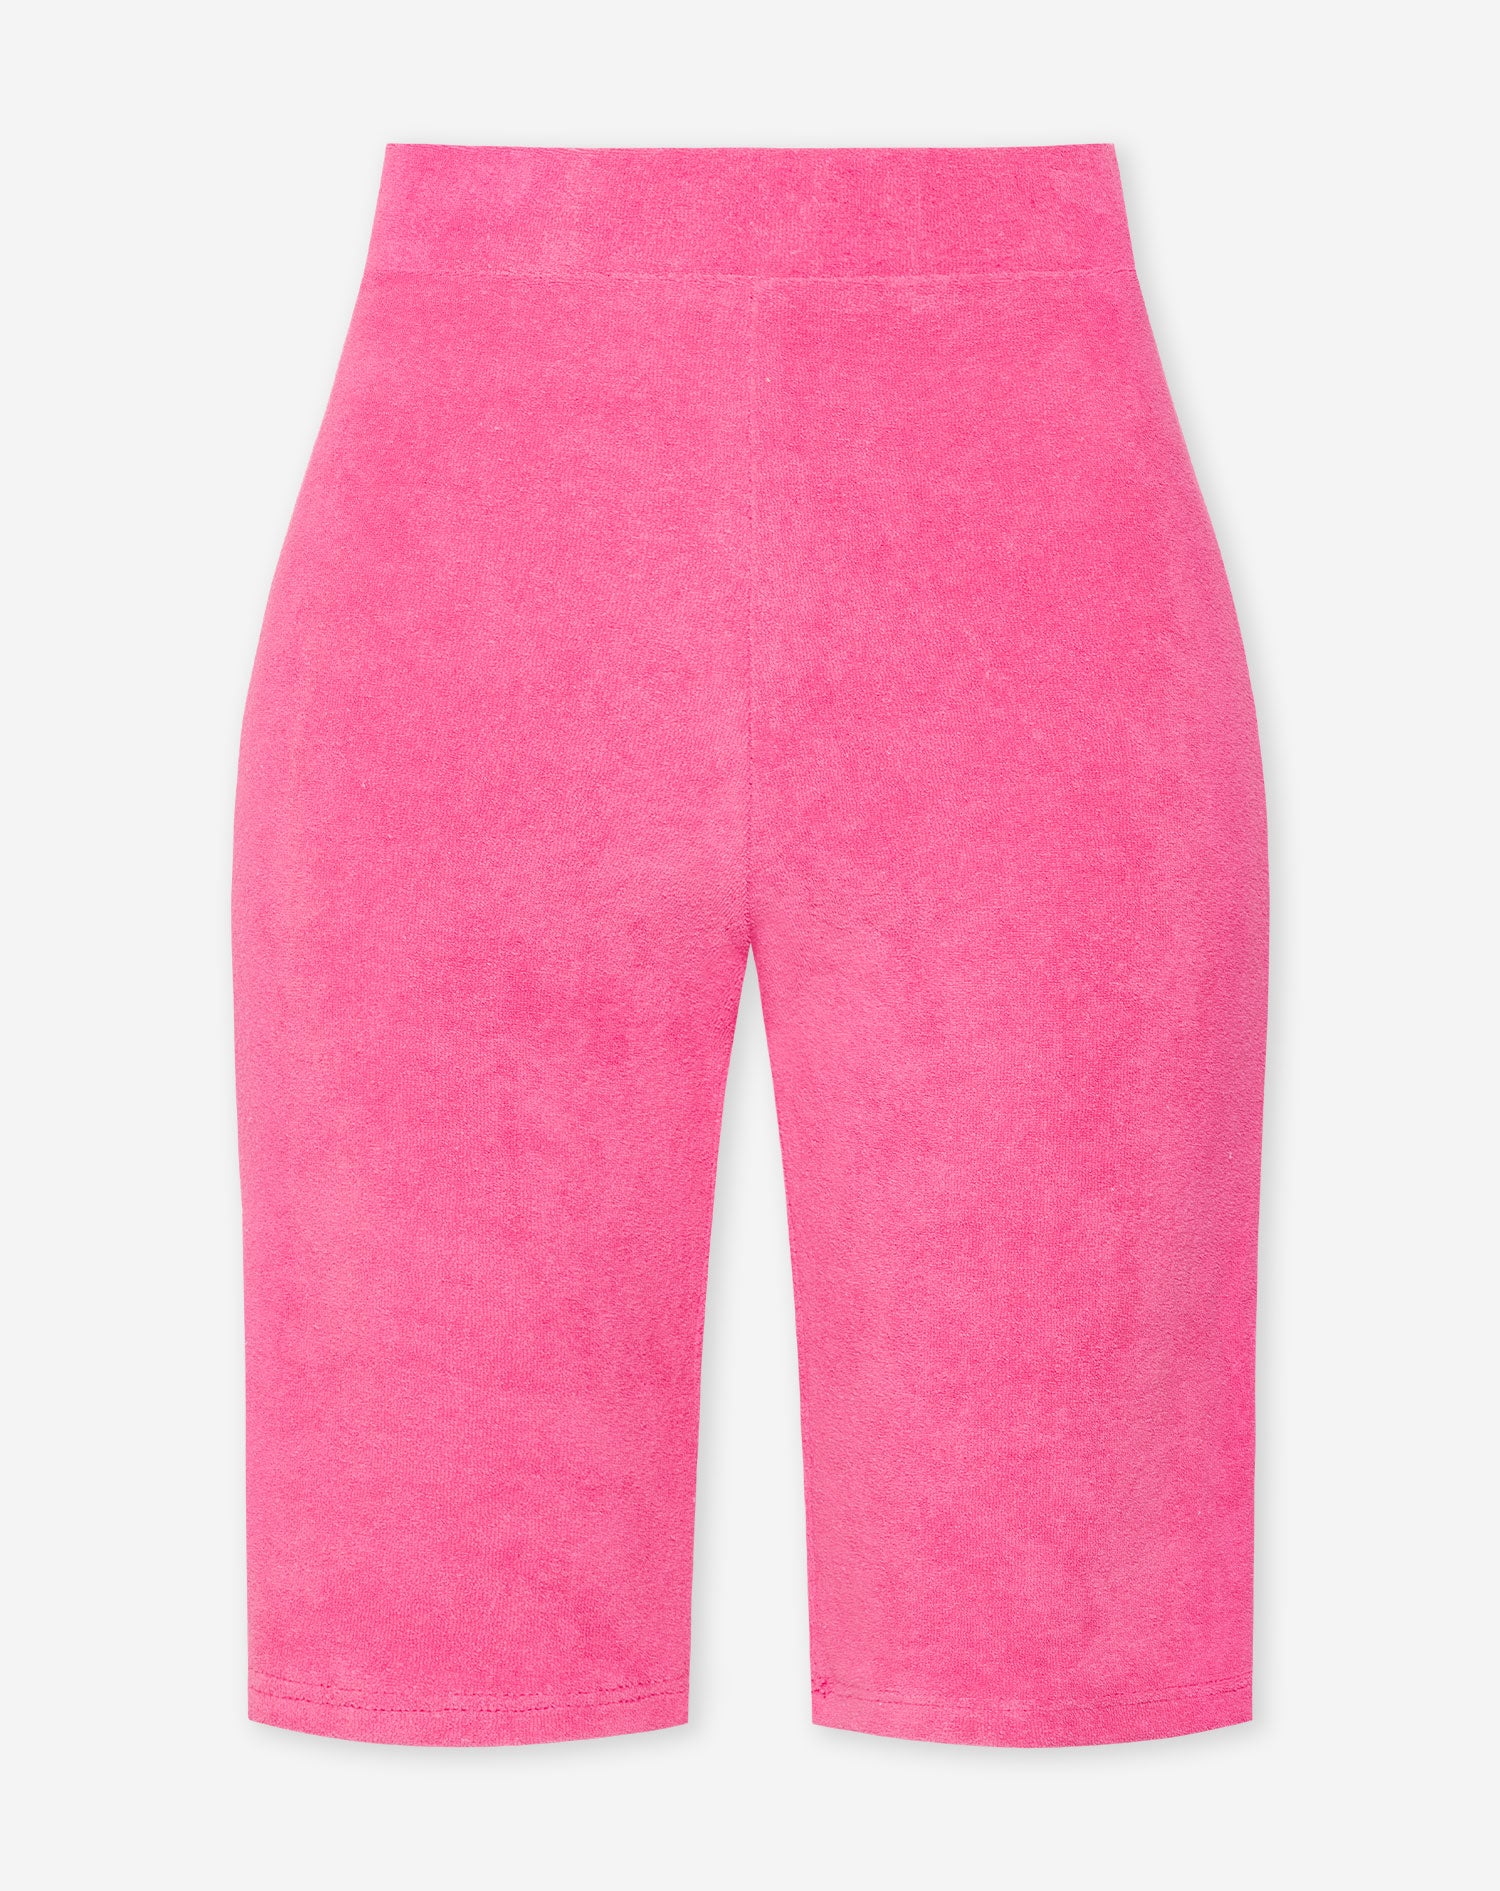 FROTTE CYCLE SHORT FUCHSIA